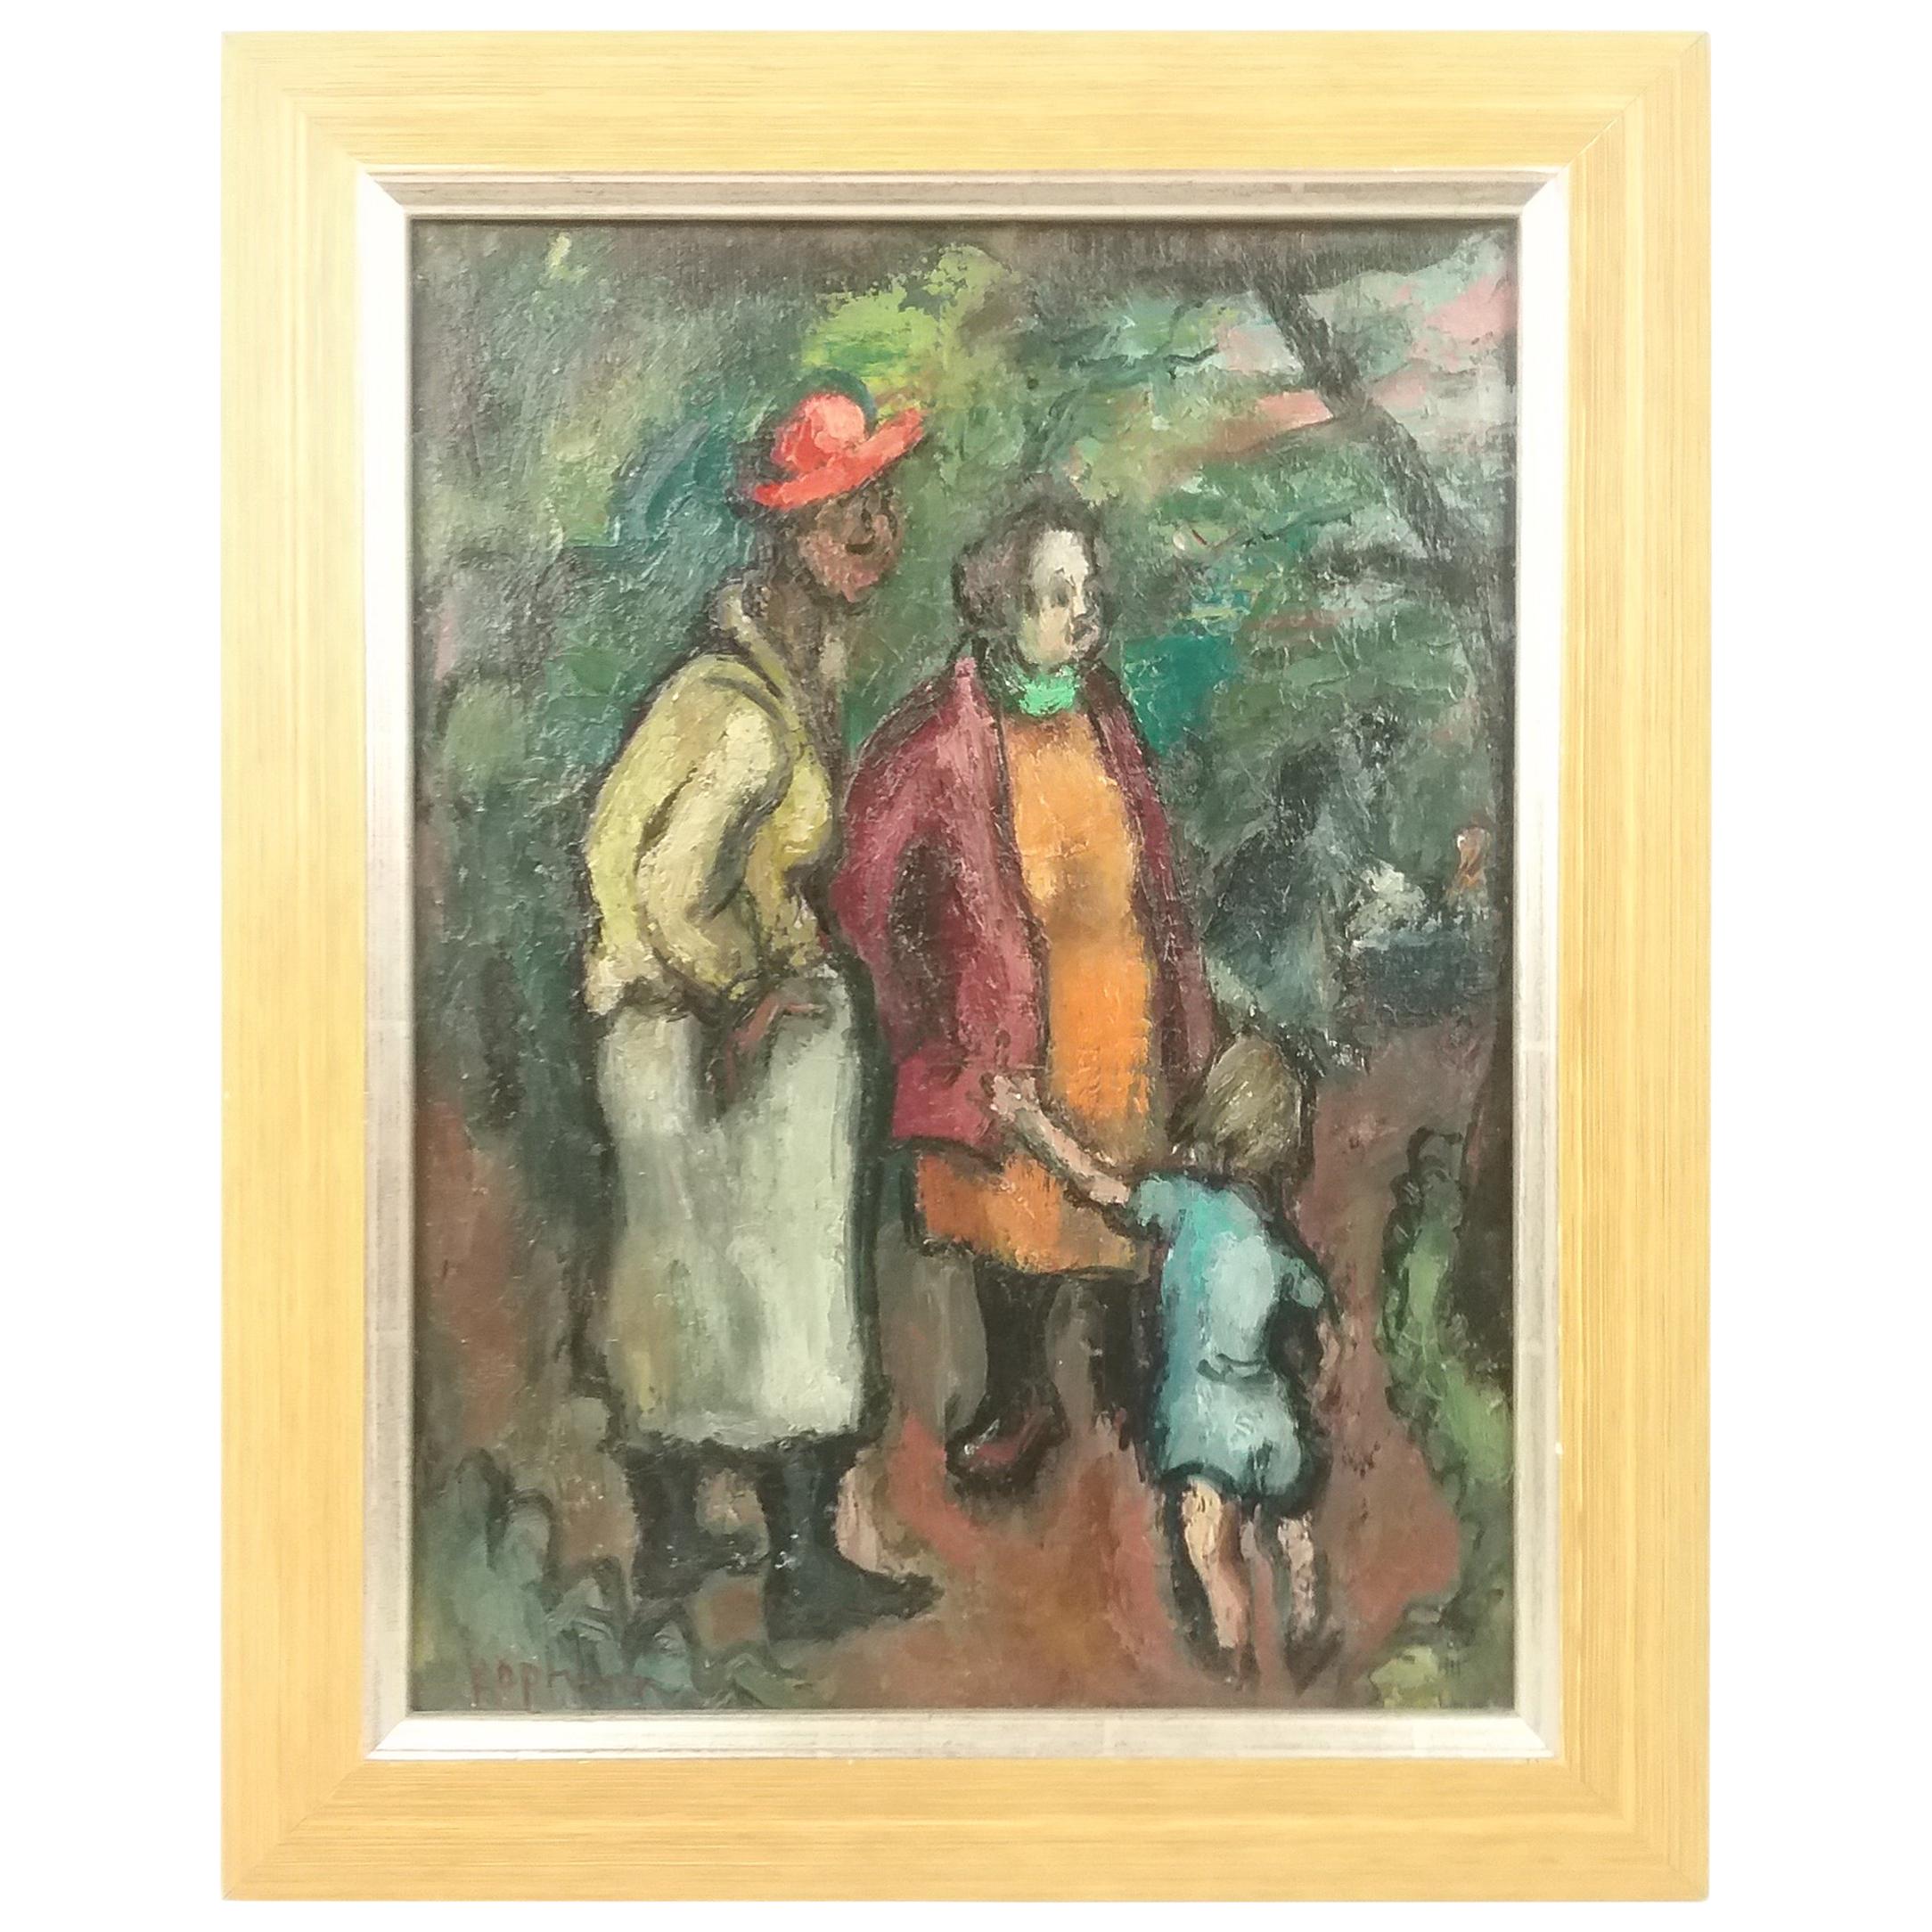 Modern Oil on Canvas "Two Women with Child in Park" by Benjamin Kopman